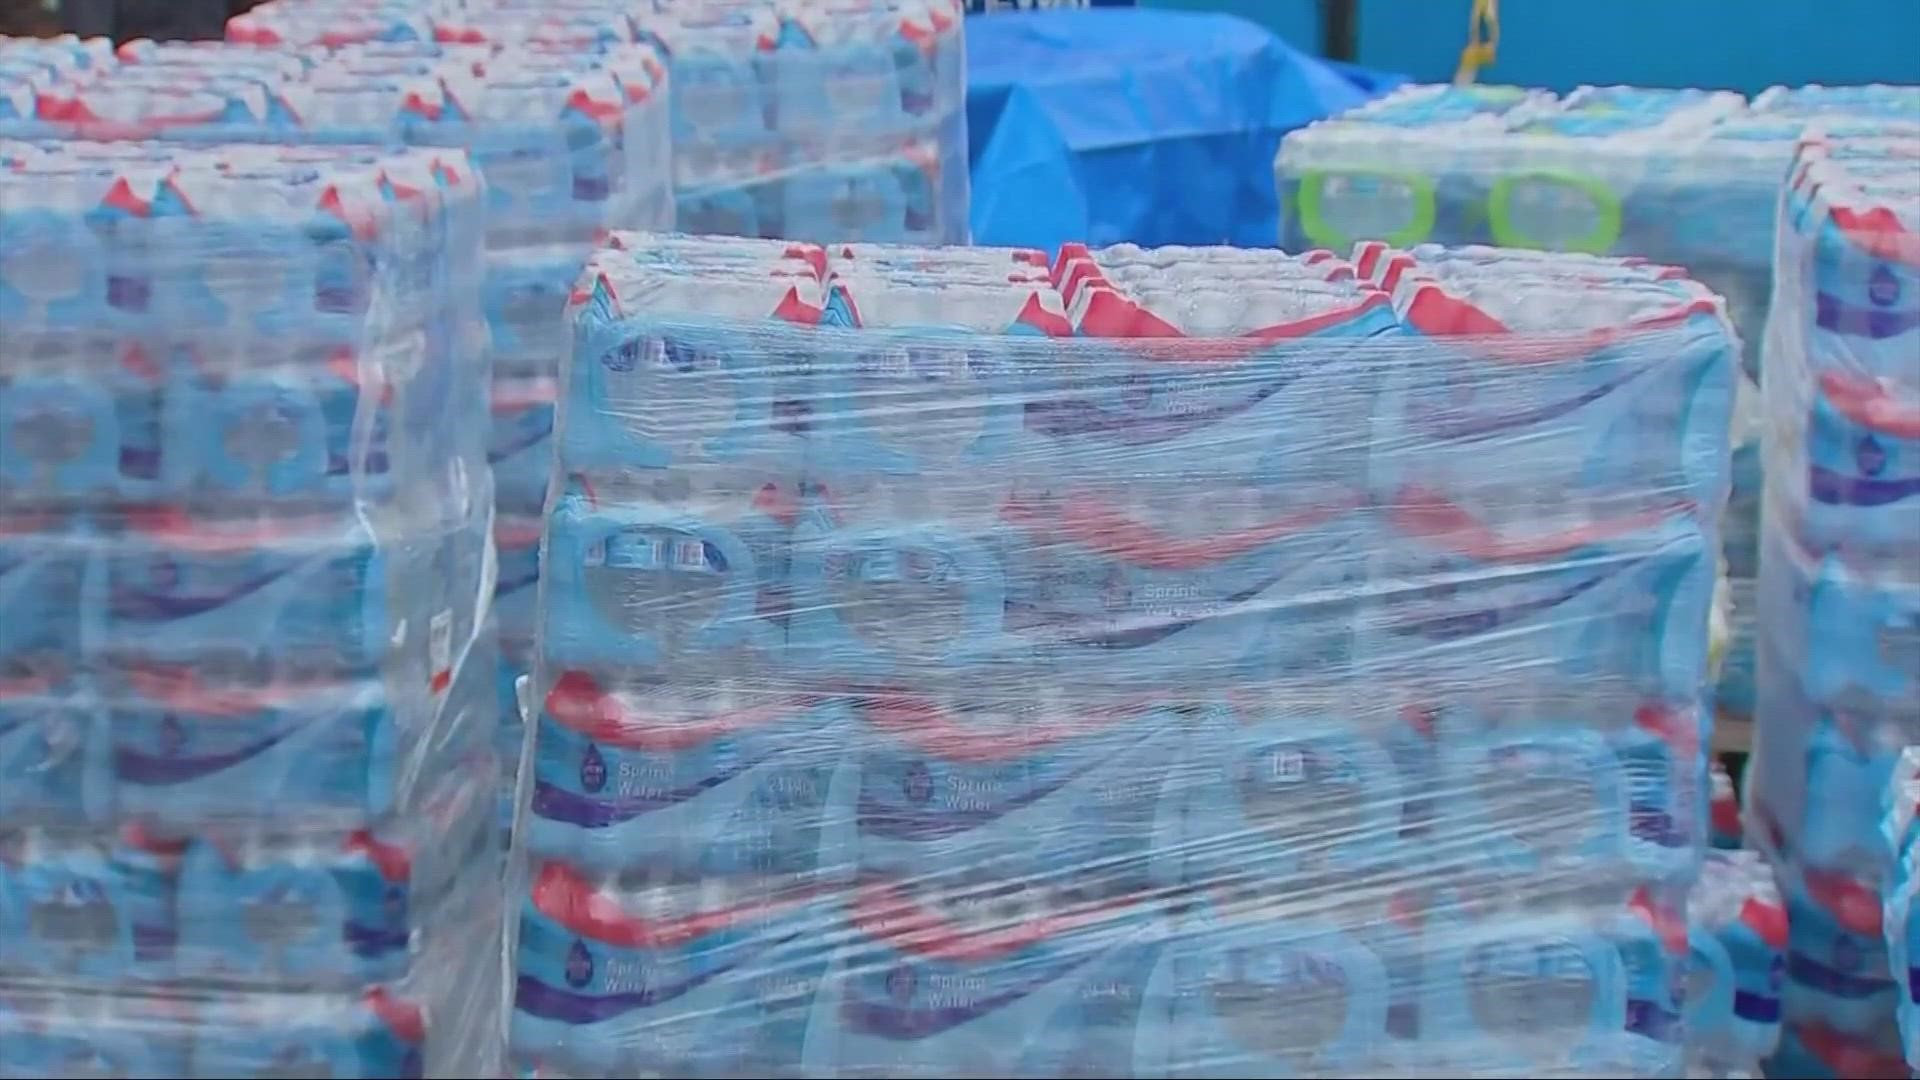 Many of the organizations have been supplying the community with bottled water, particularly for those with private wells.